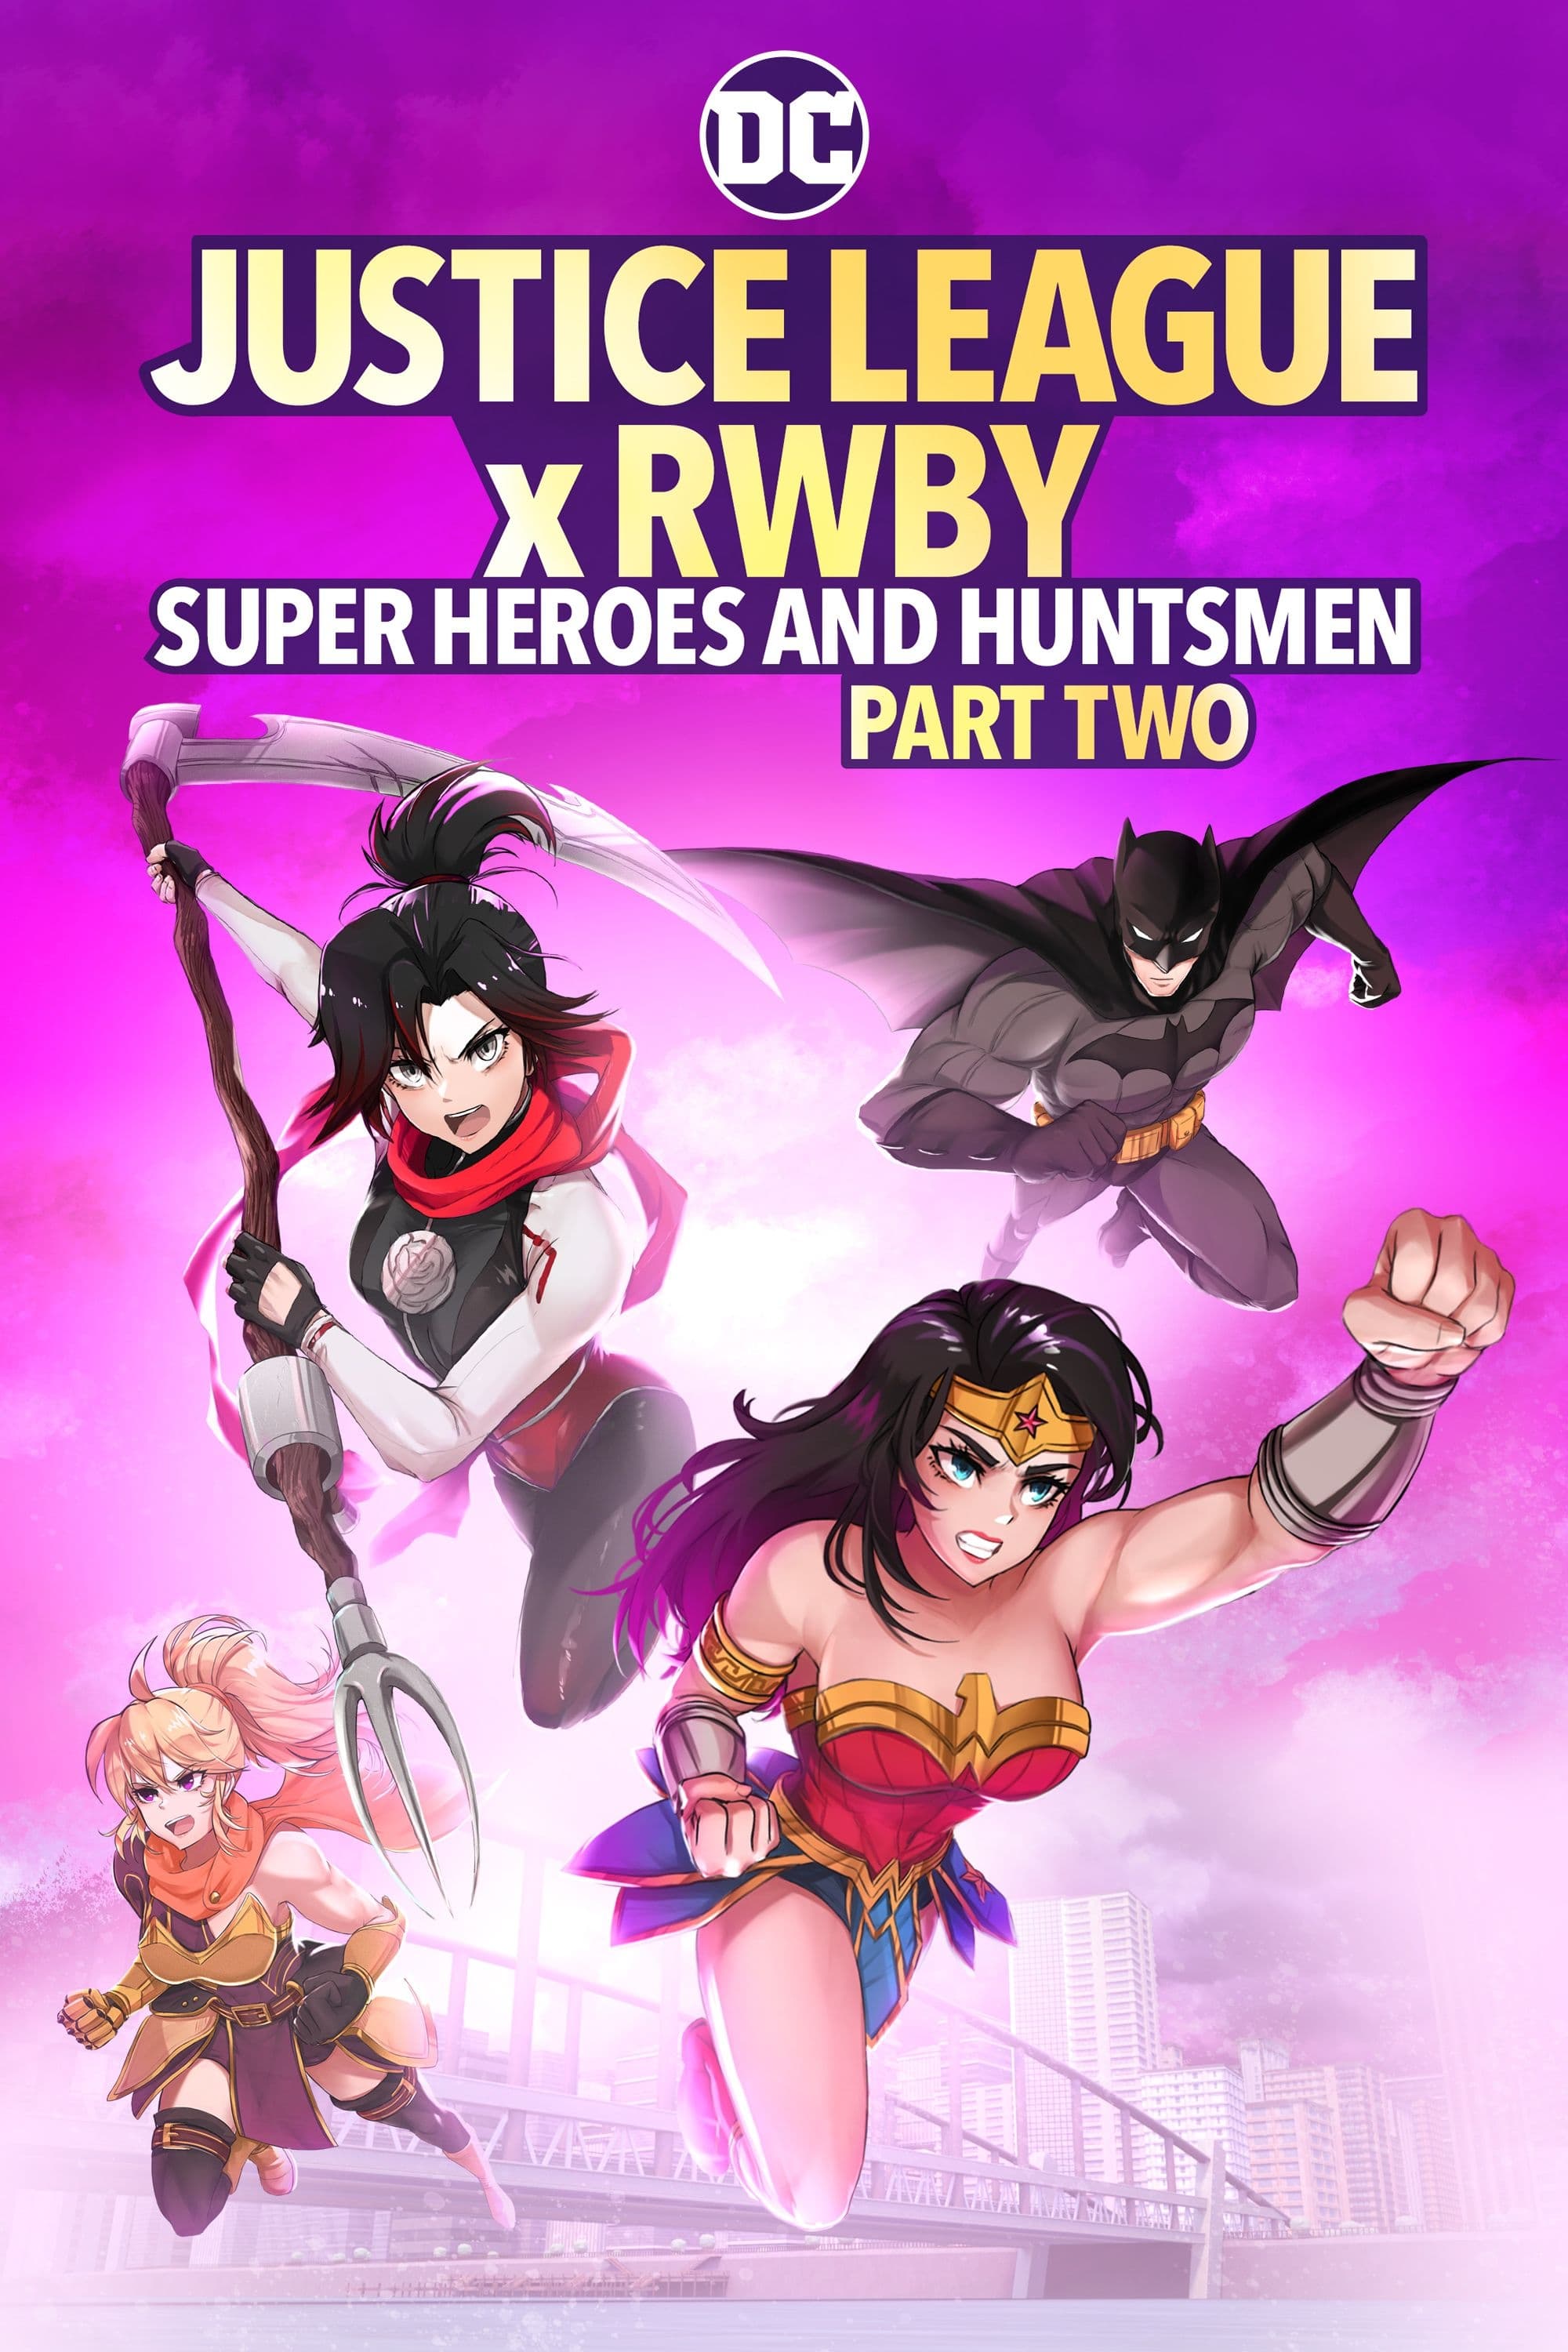 Justice League X Rwby Super Heroes And Huntsmen Part Two